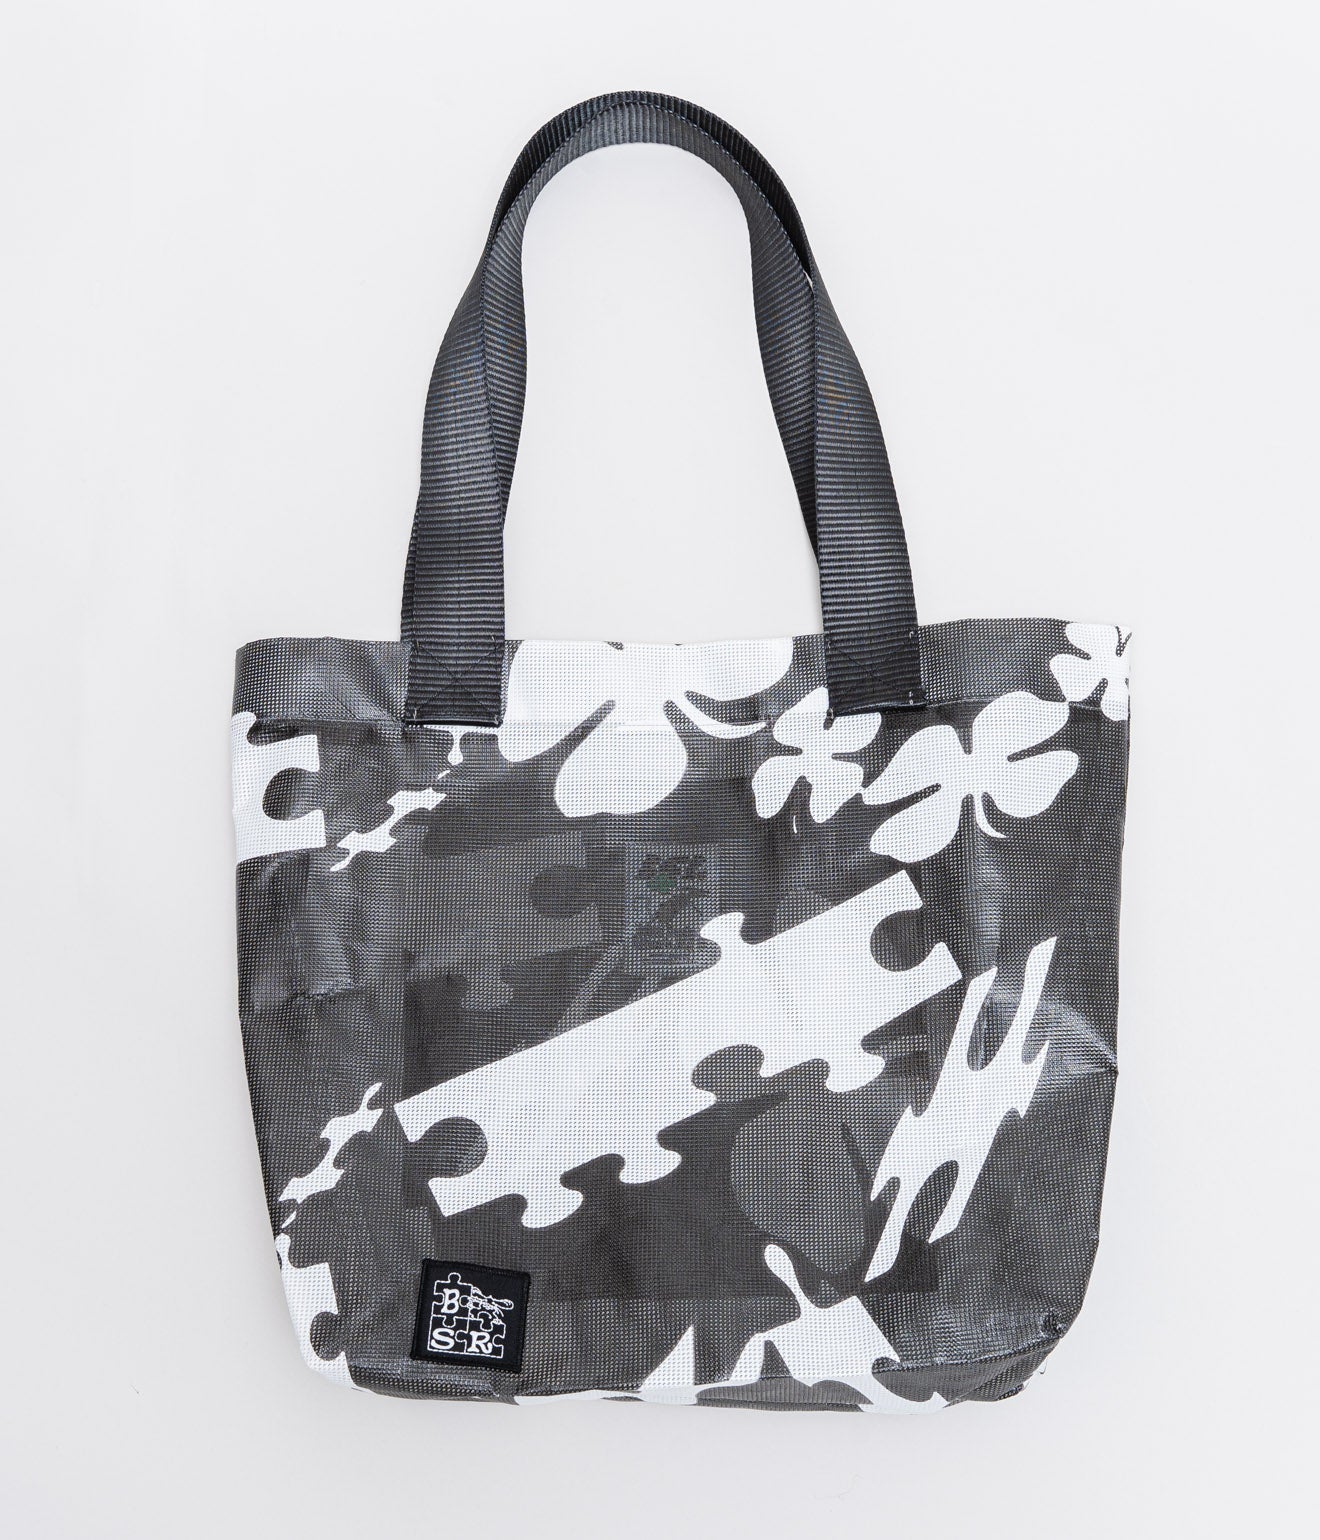 Butter Sessions "JIGSAW TOTE BAG" BLACK & WHITE - WEAREALLANIMALS